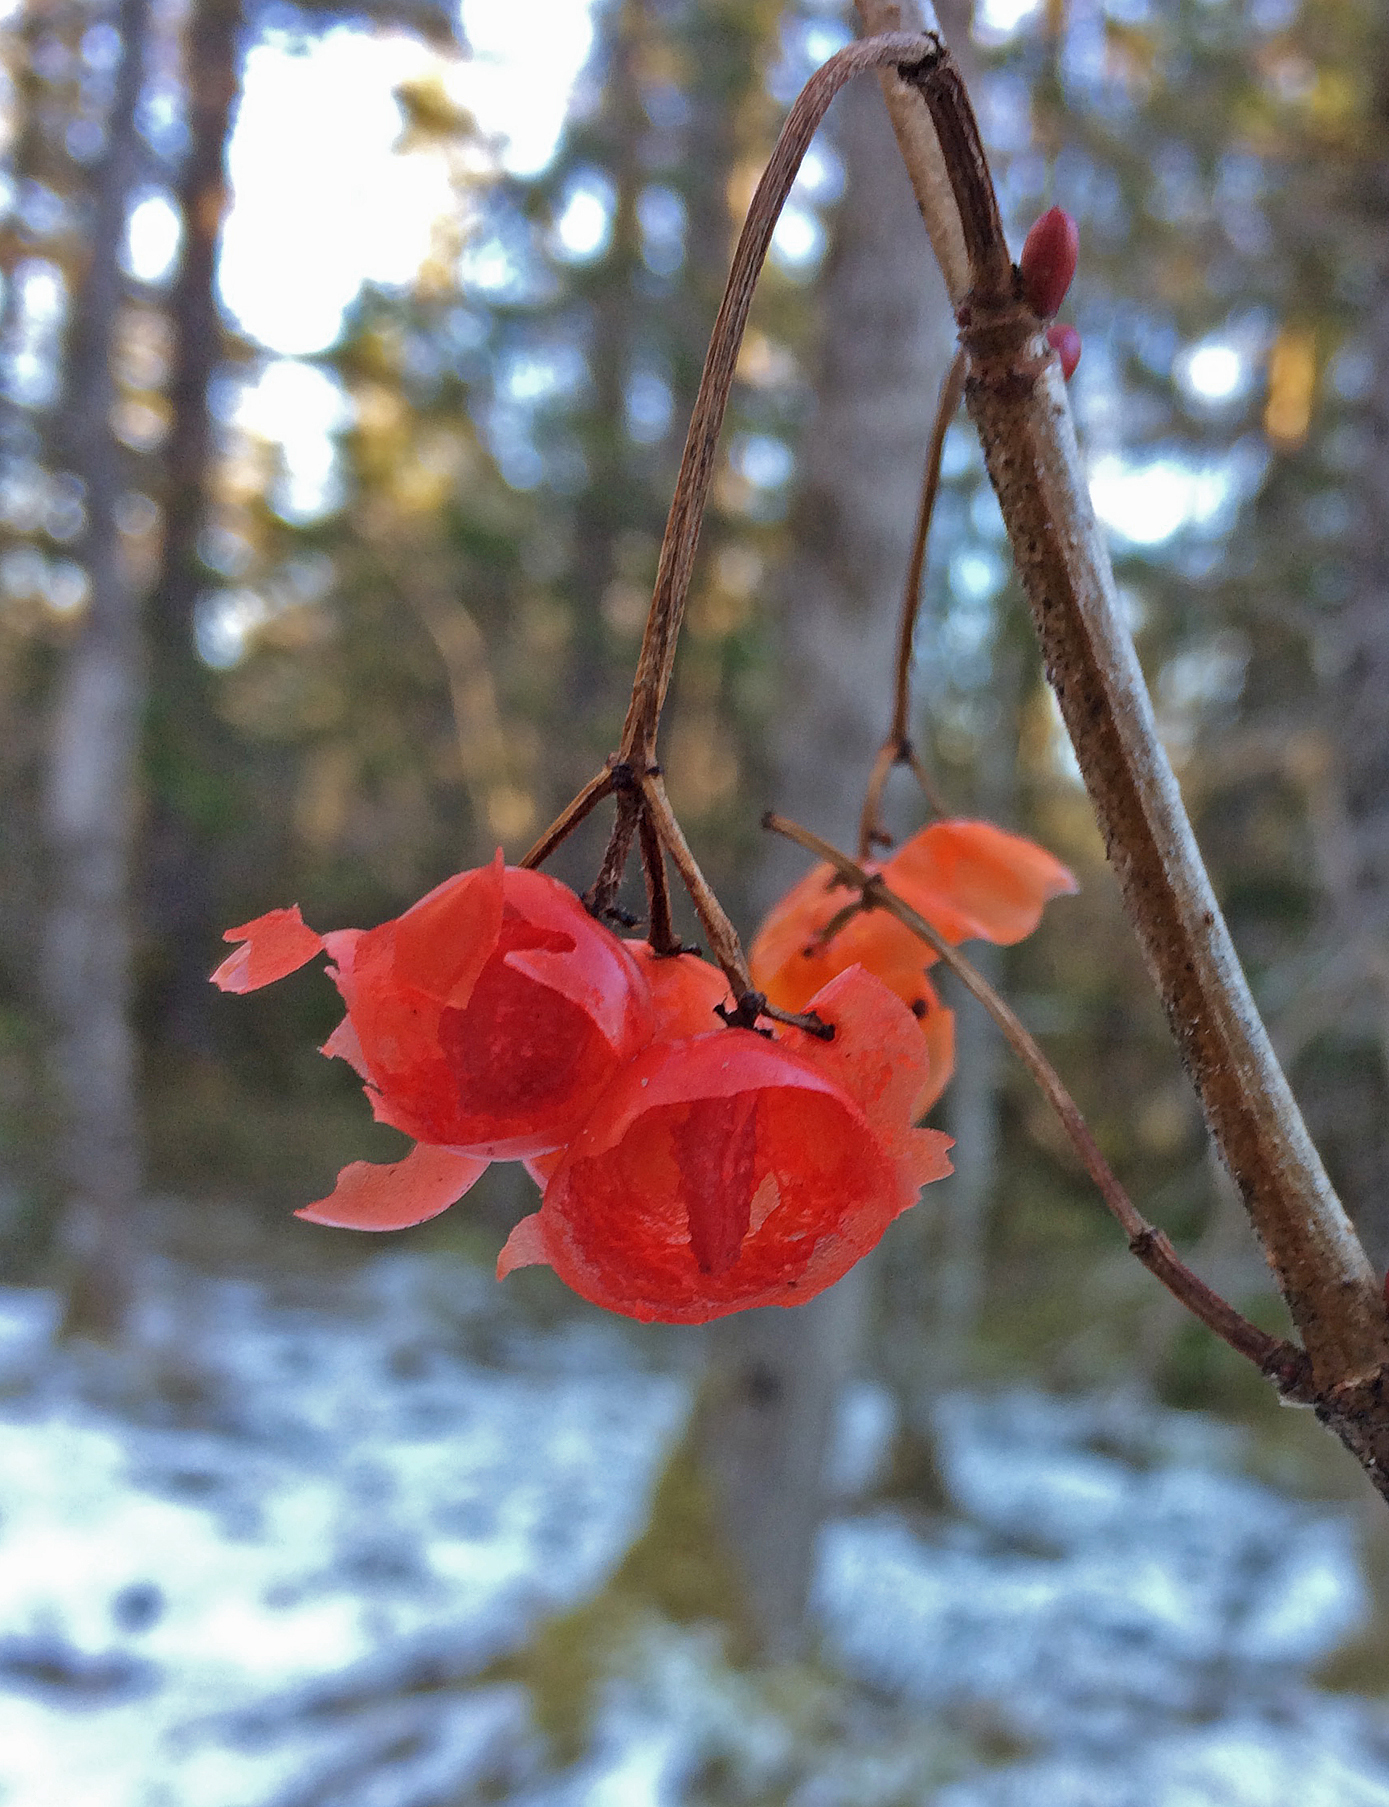 Fruits of highbush cranberry dangle from the twig, their seeds extracted by pine grosbeaks. (Photo by Kathy Hocker)